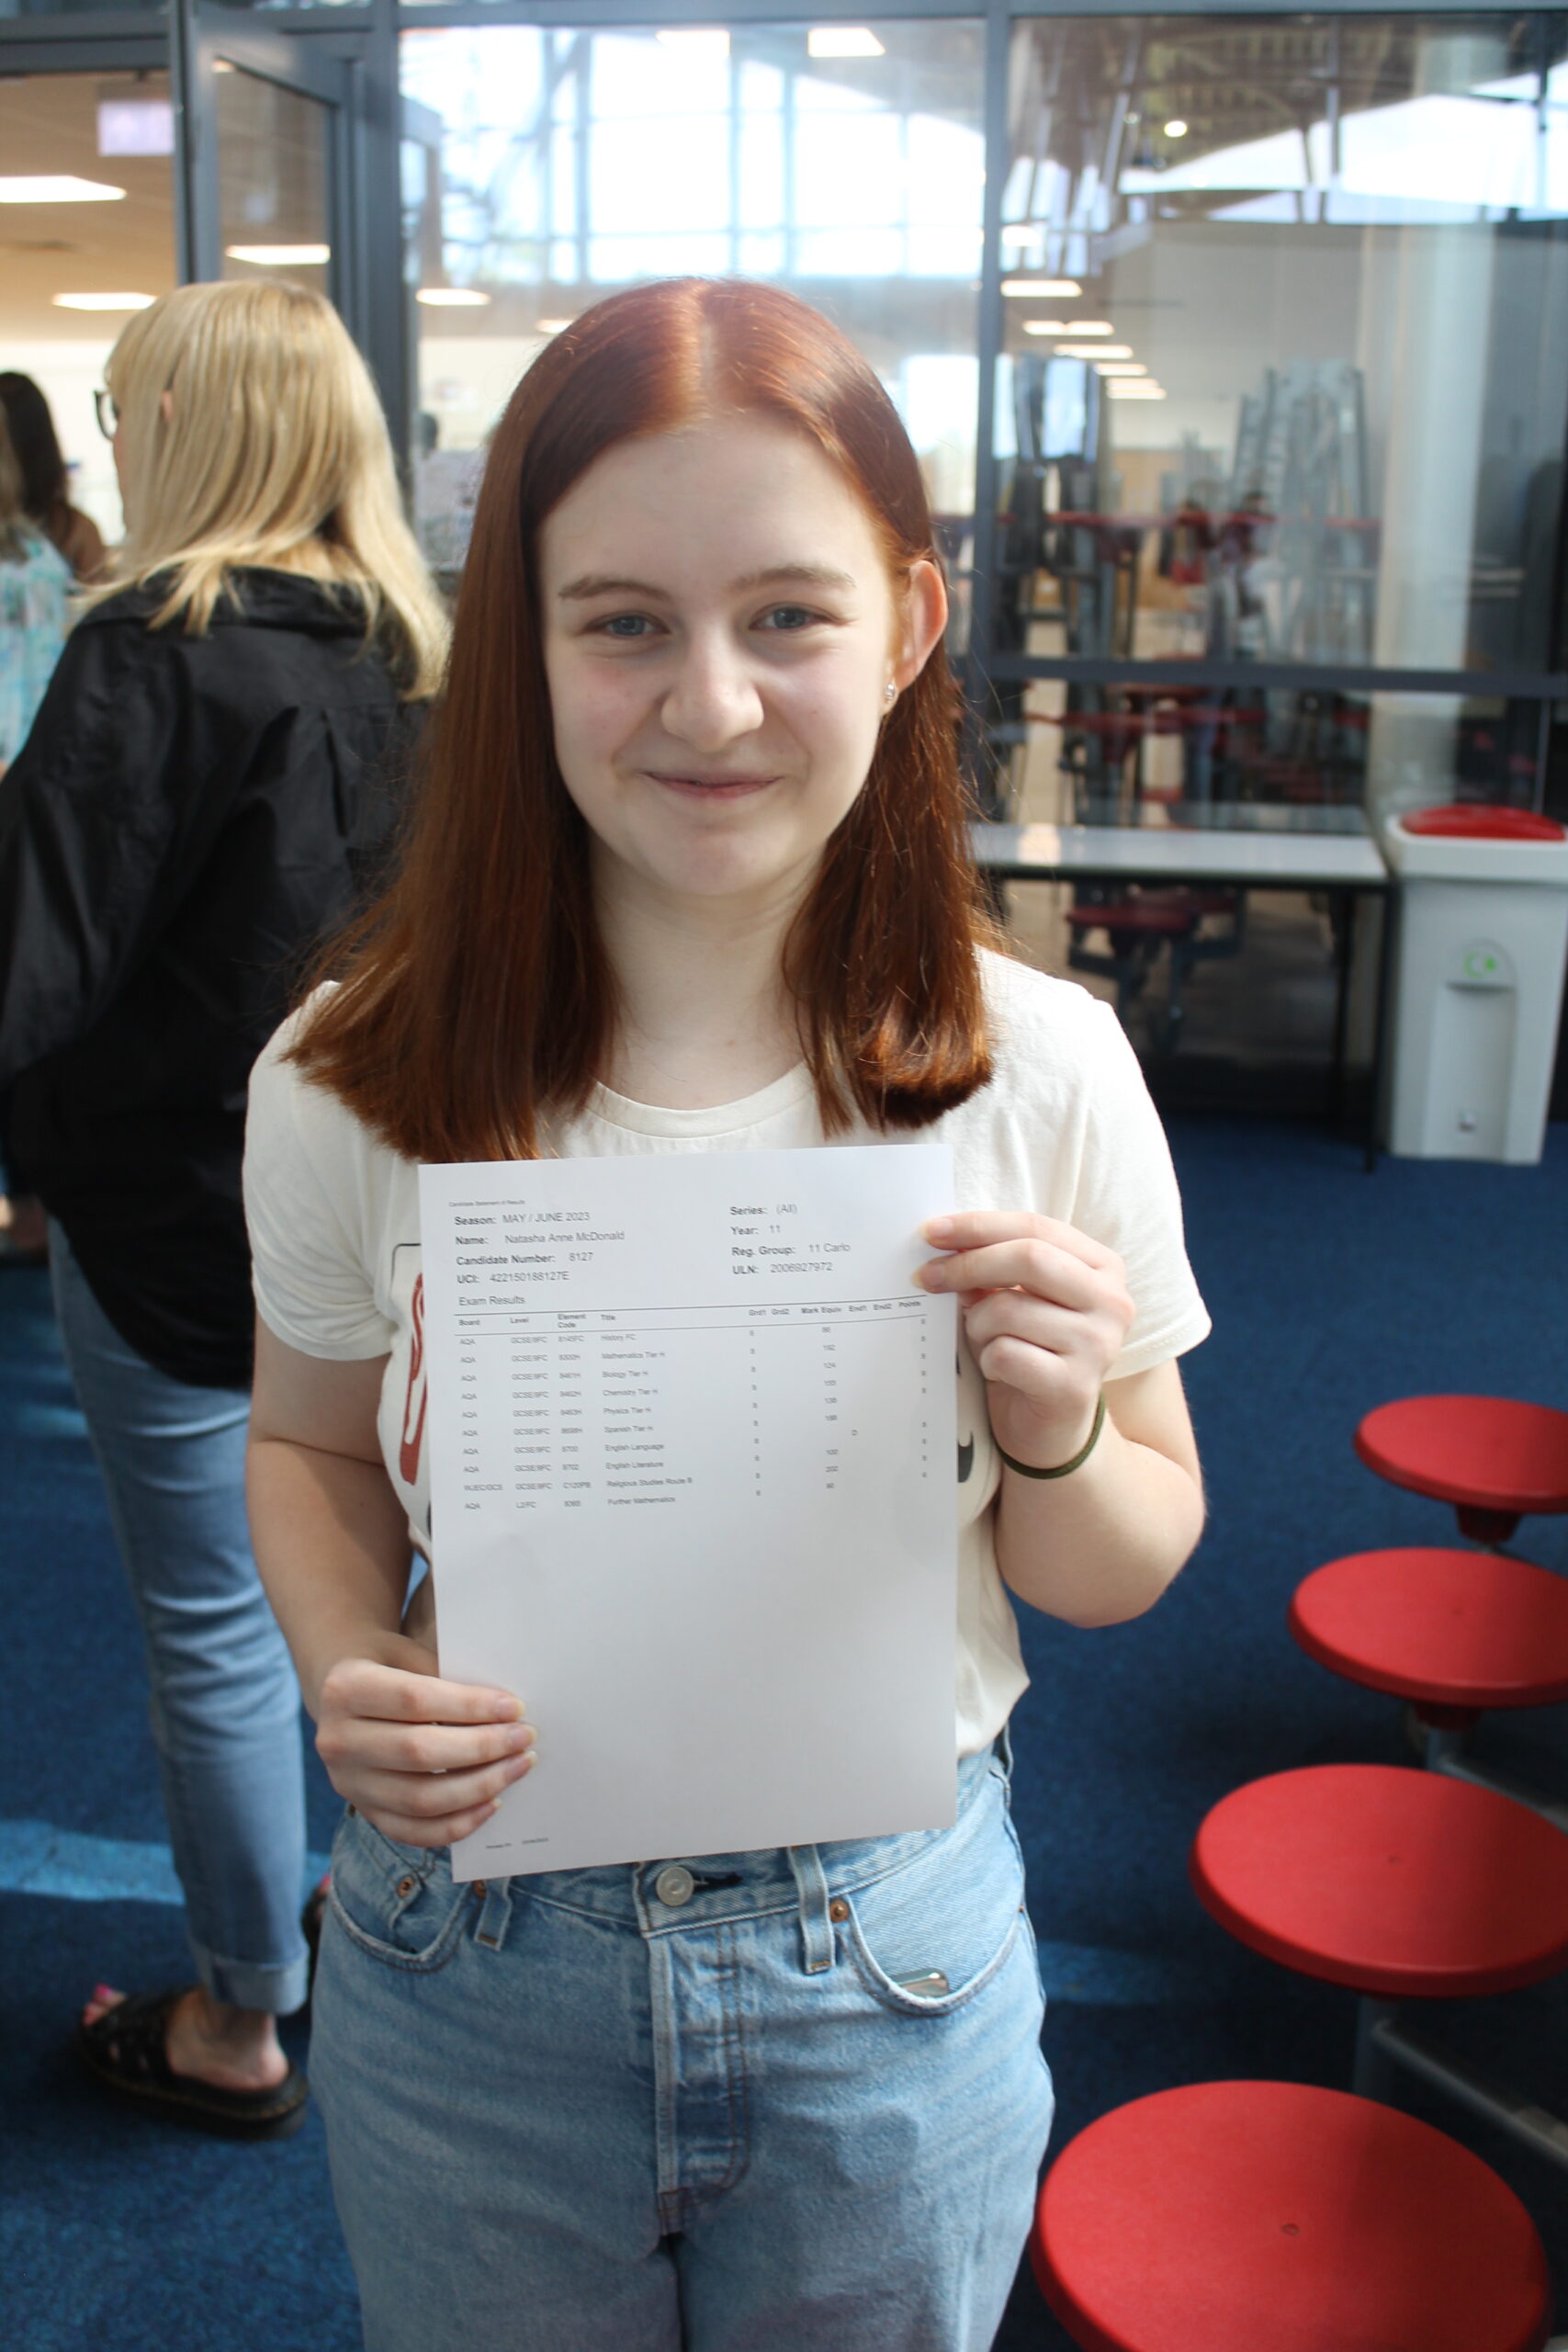 Year 11 Students Return for GCSE Results – St. Benedict's School